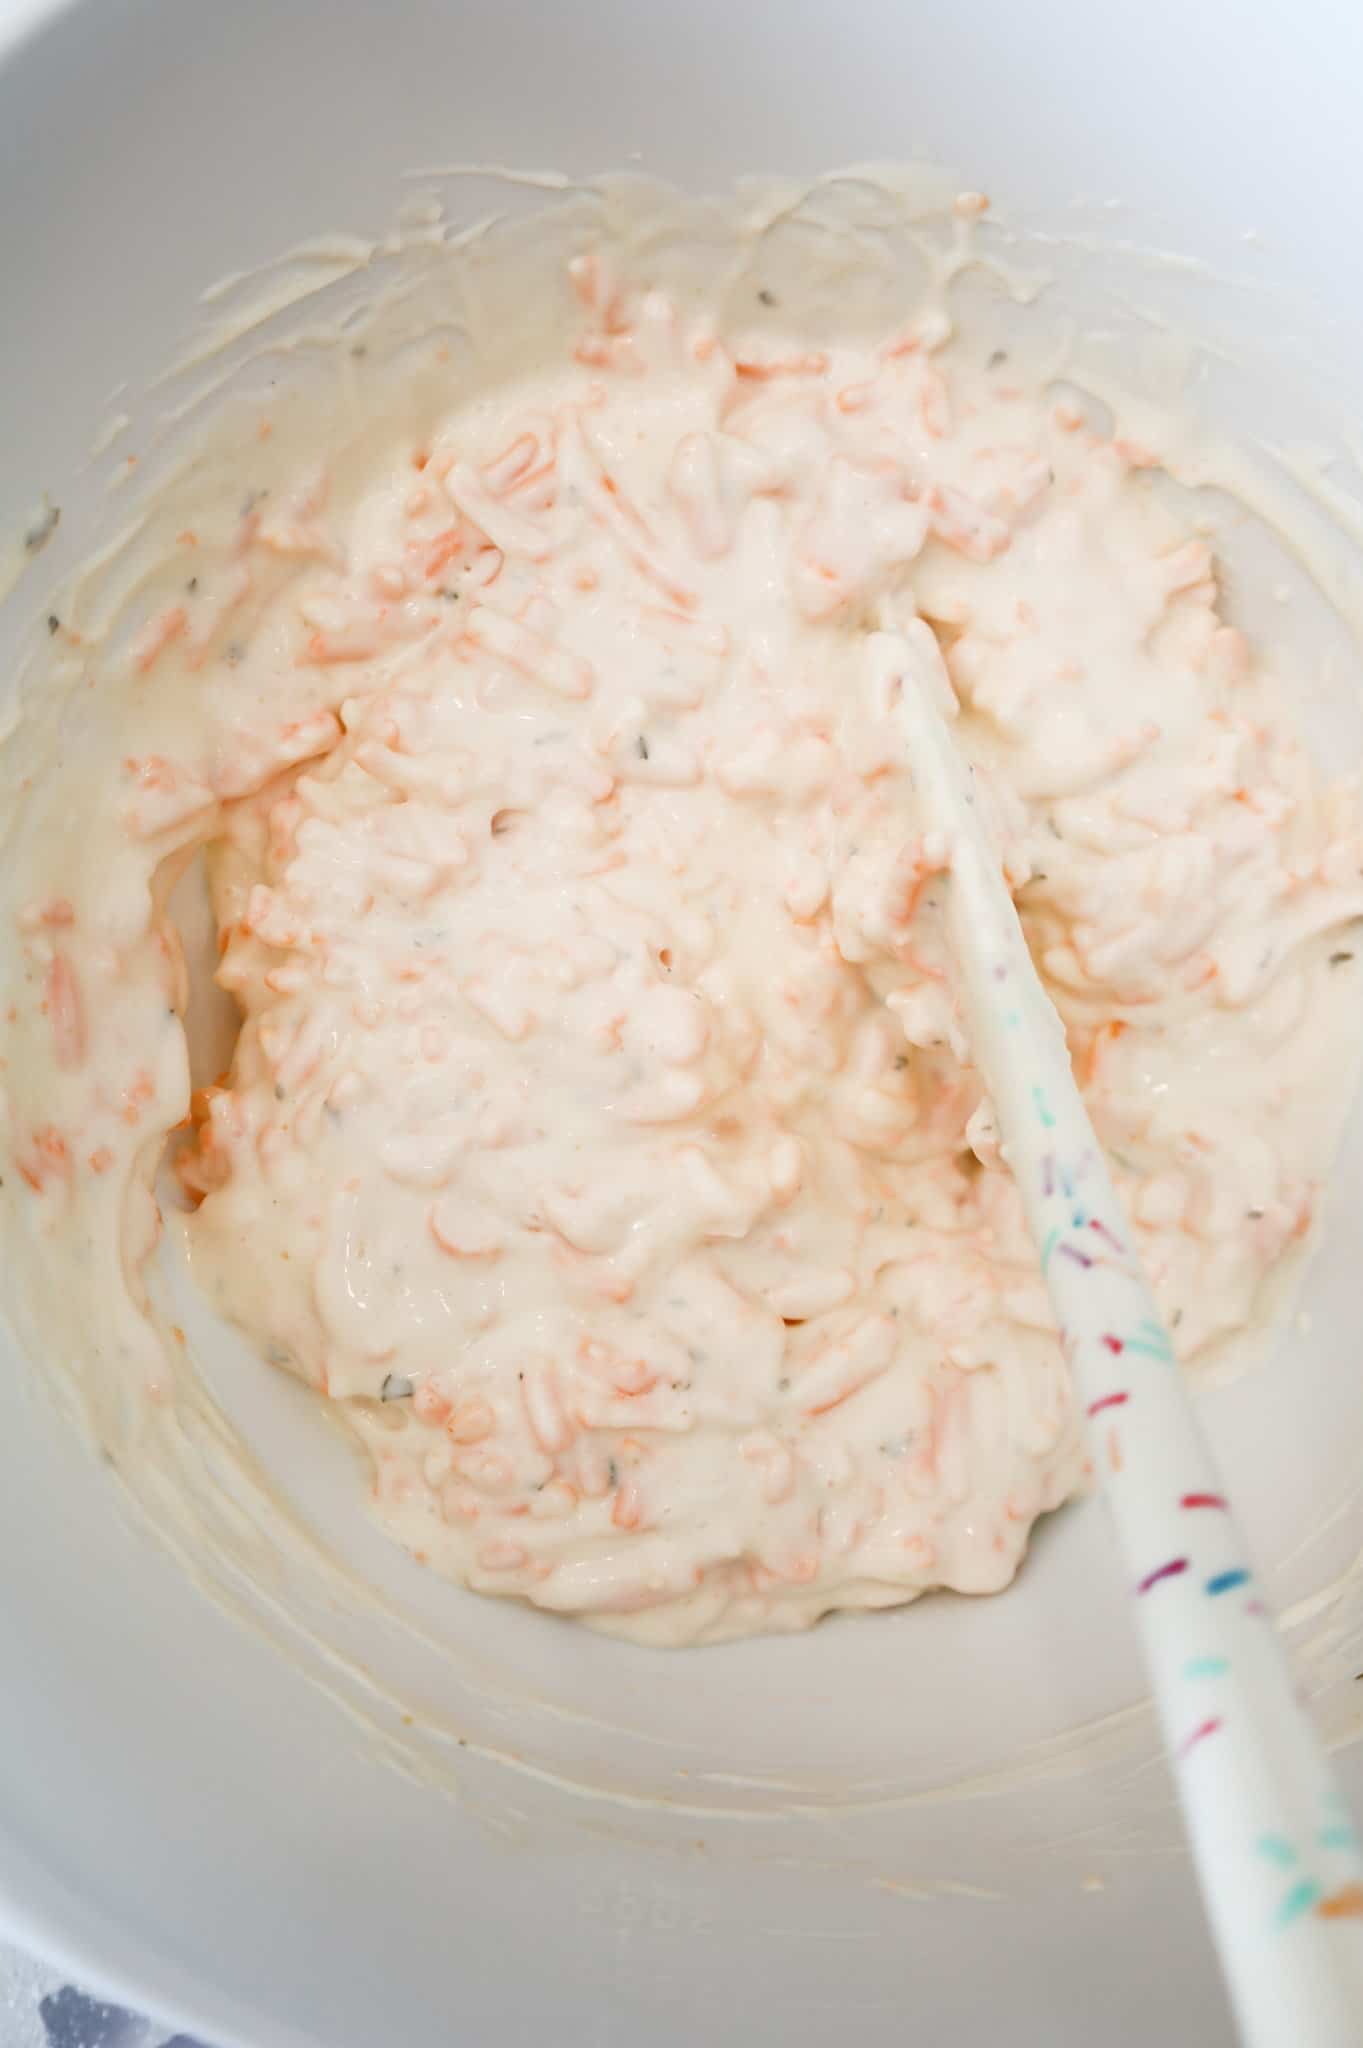 shredded cheddar, mayo and ranch dressing mixture being stirred in a mixing bowl